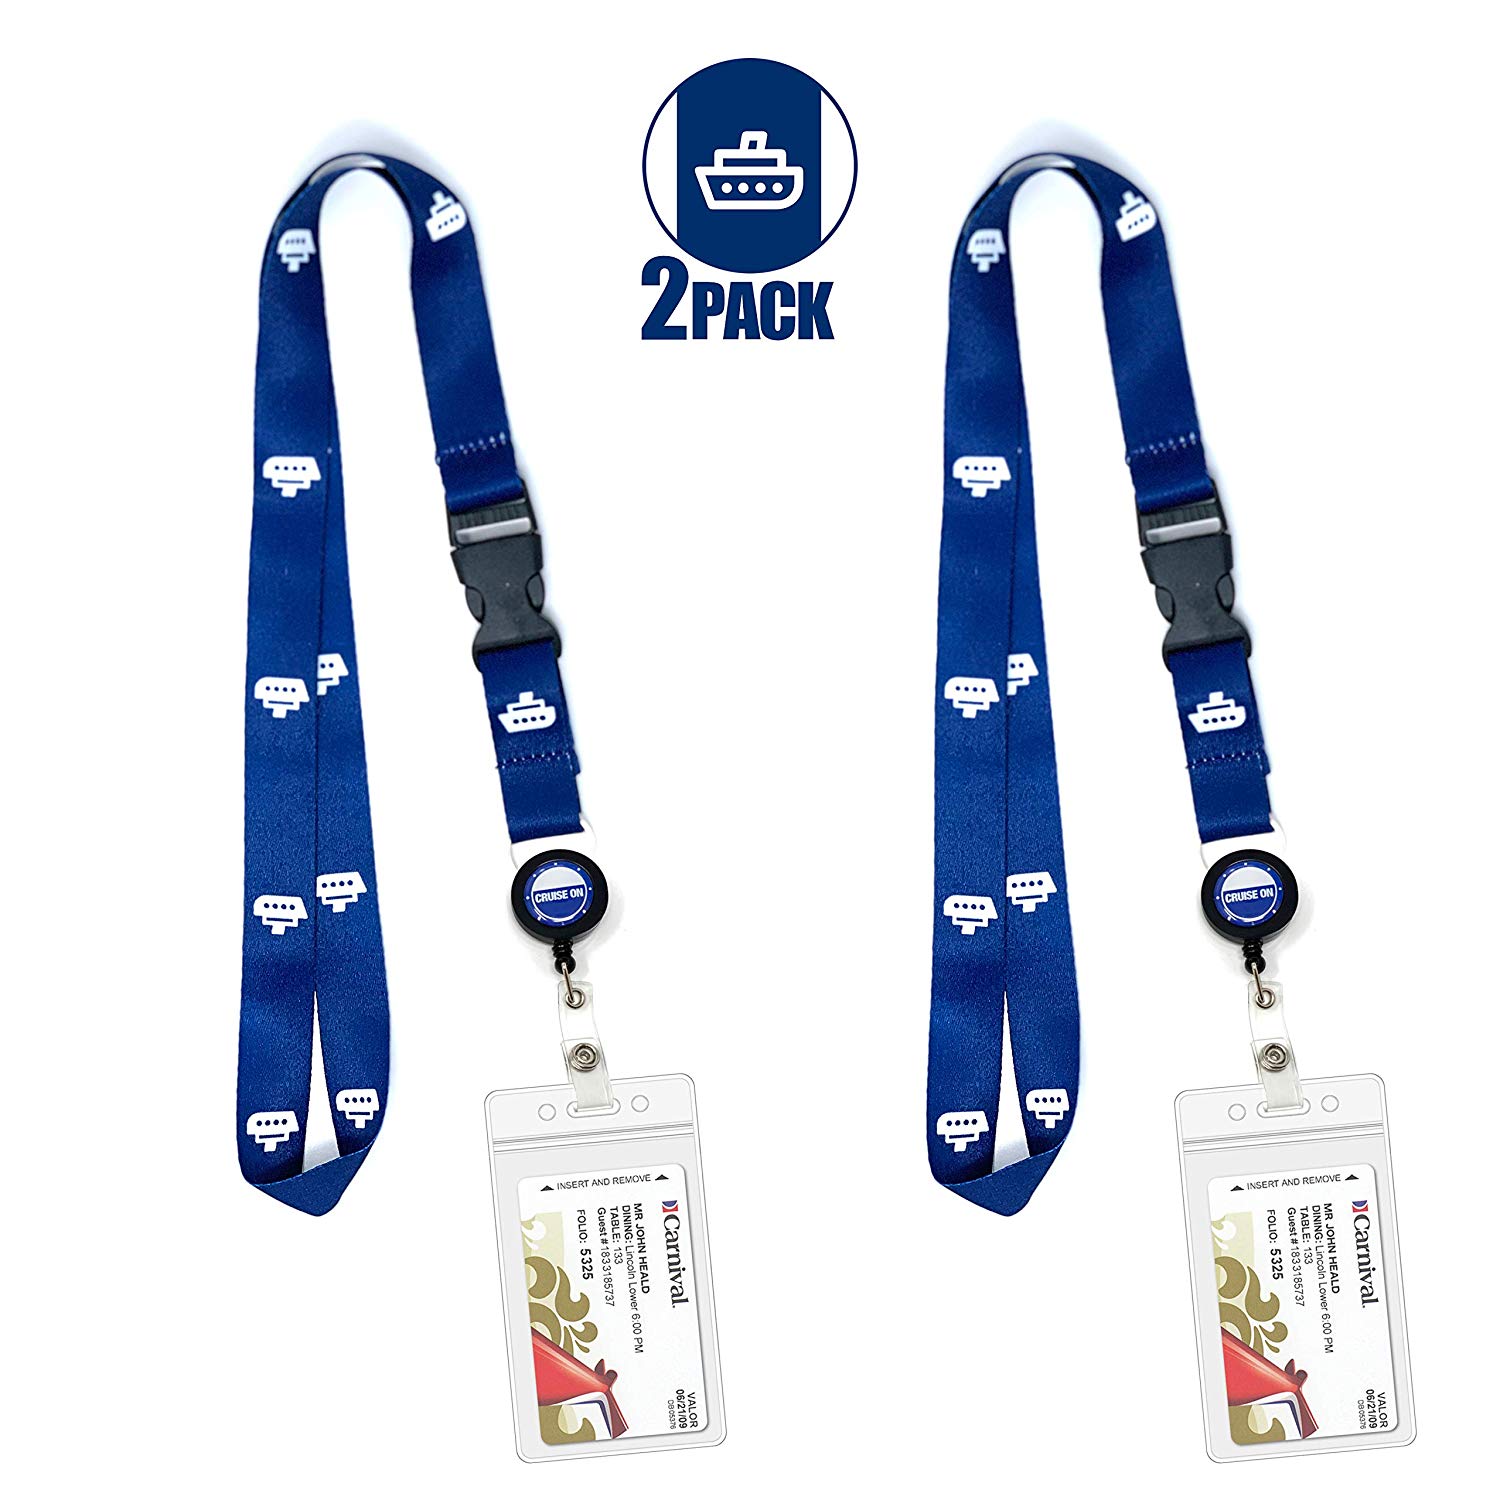 Different Types Of Lanyards You Can Choose From!